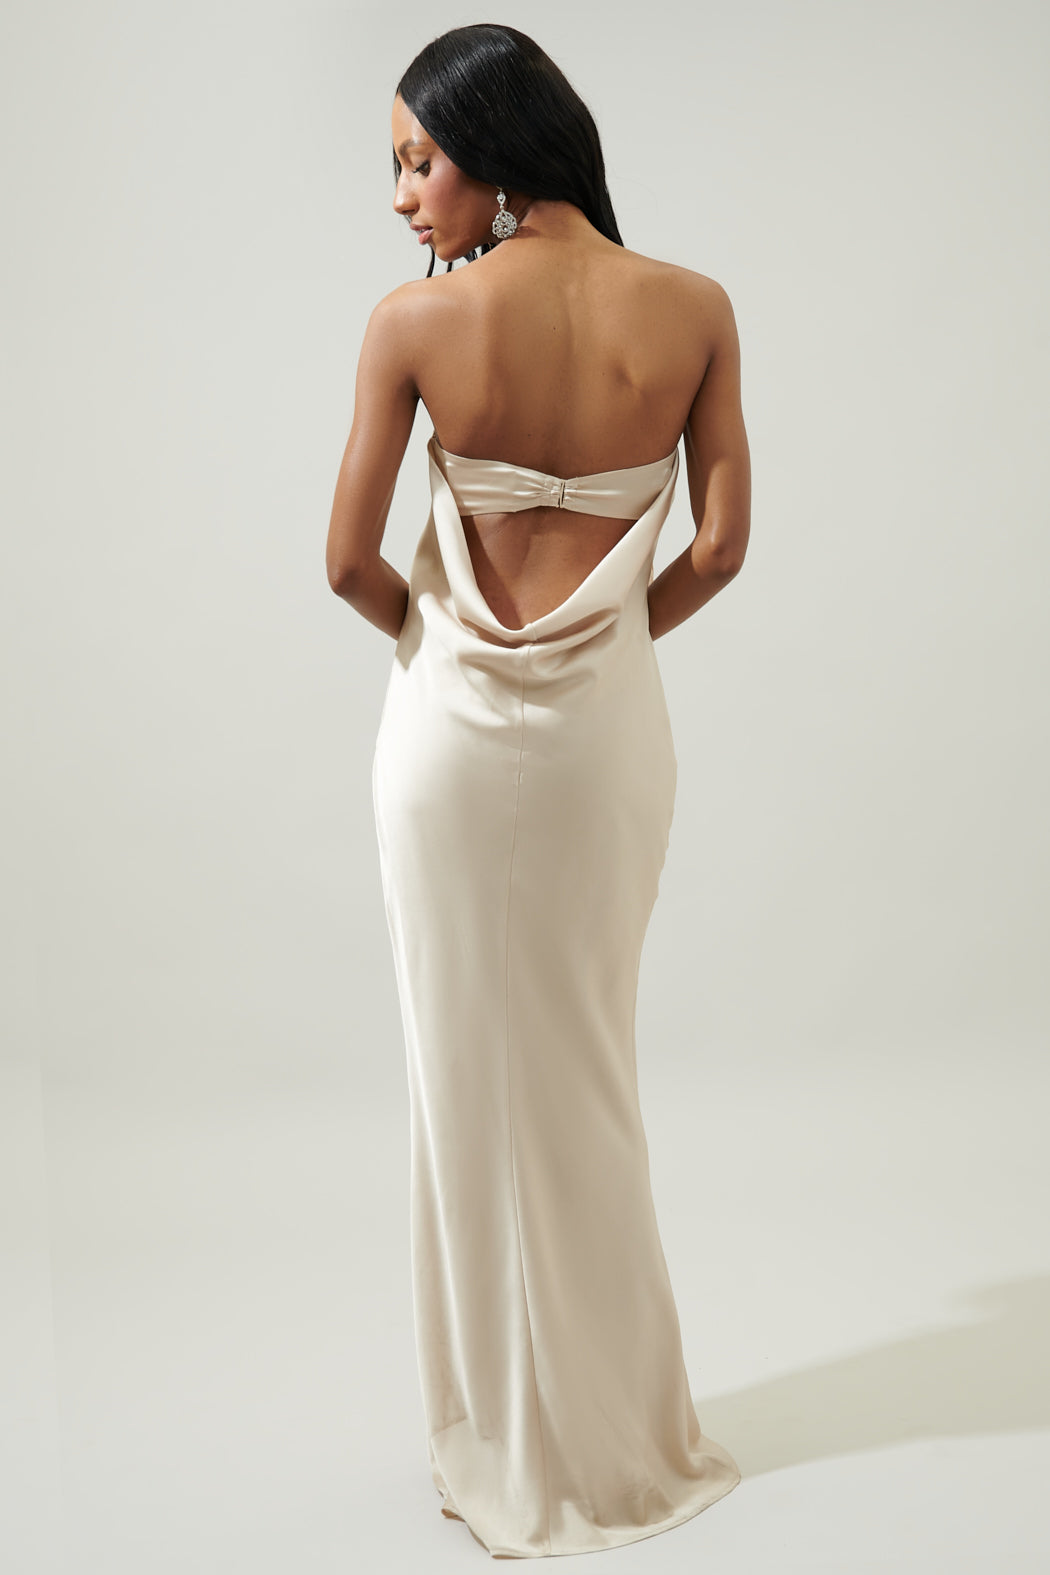 Strapless dress and need recommendations for backless strapless